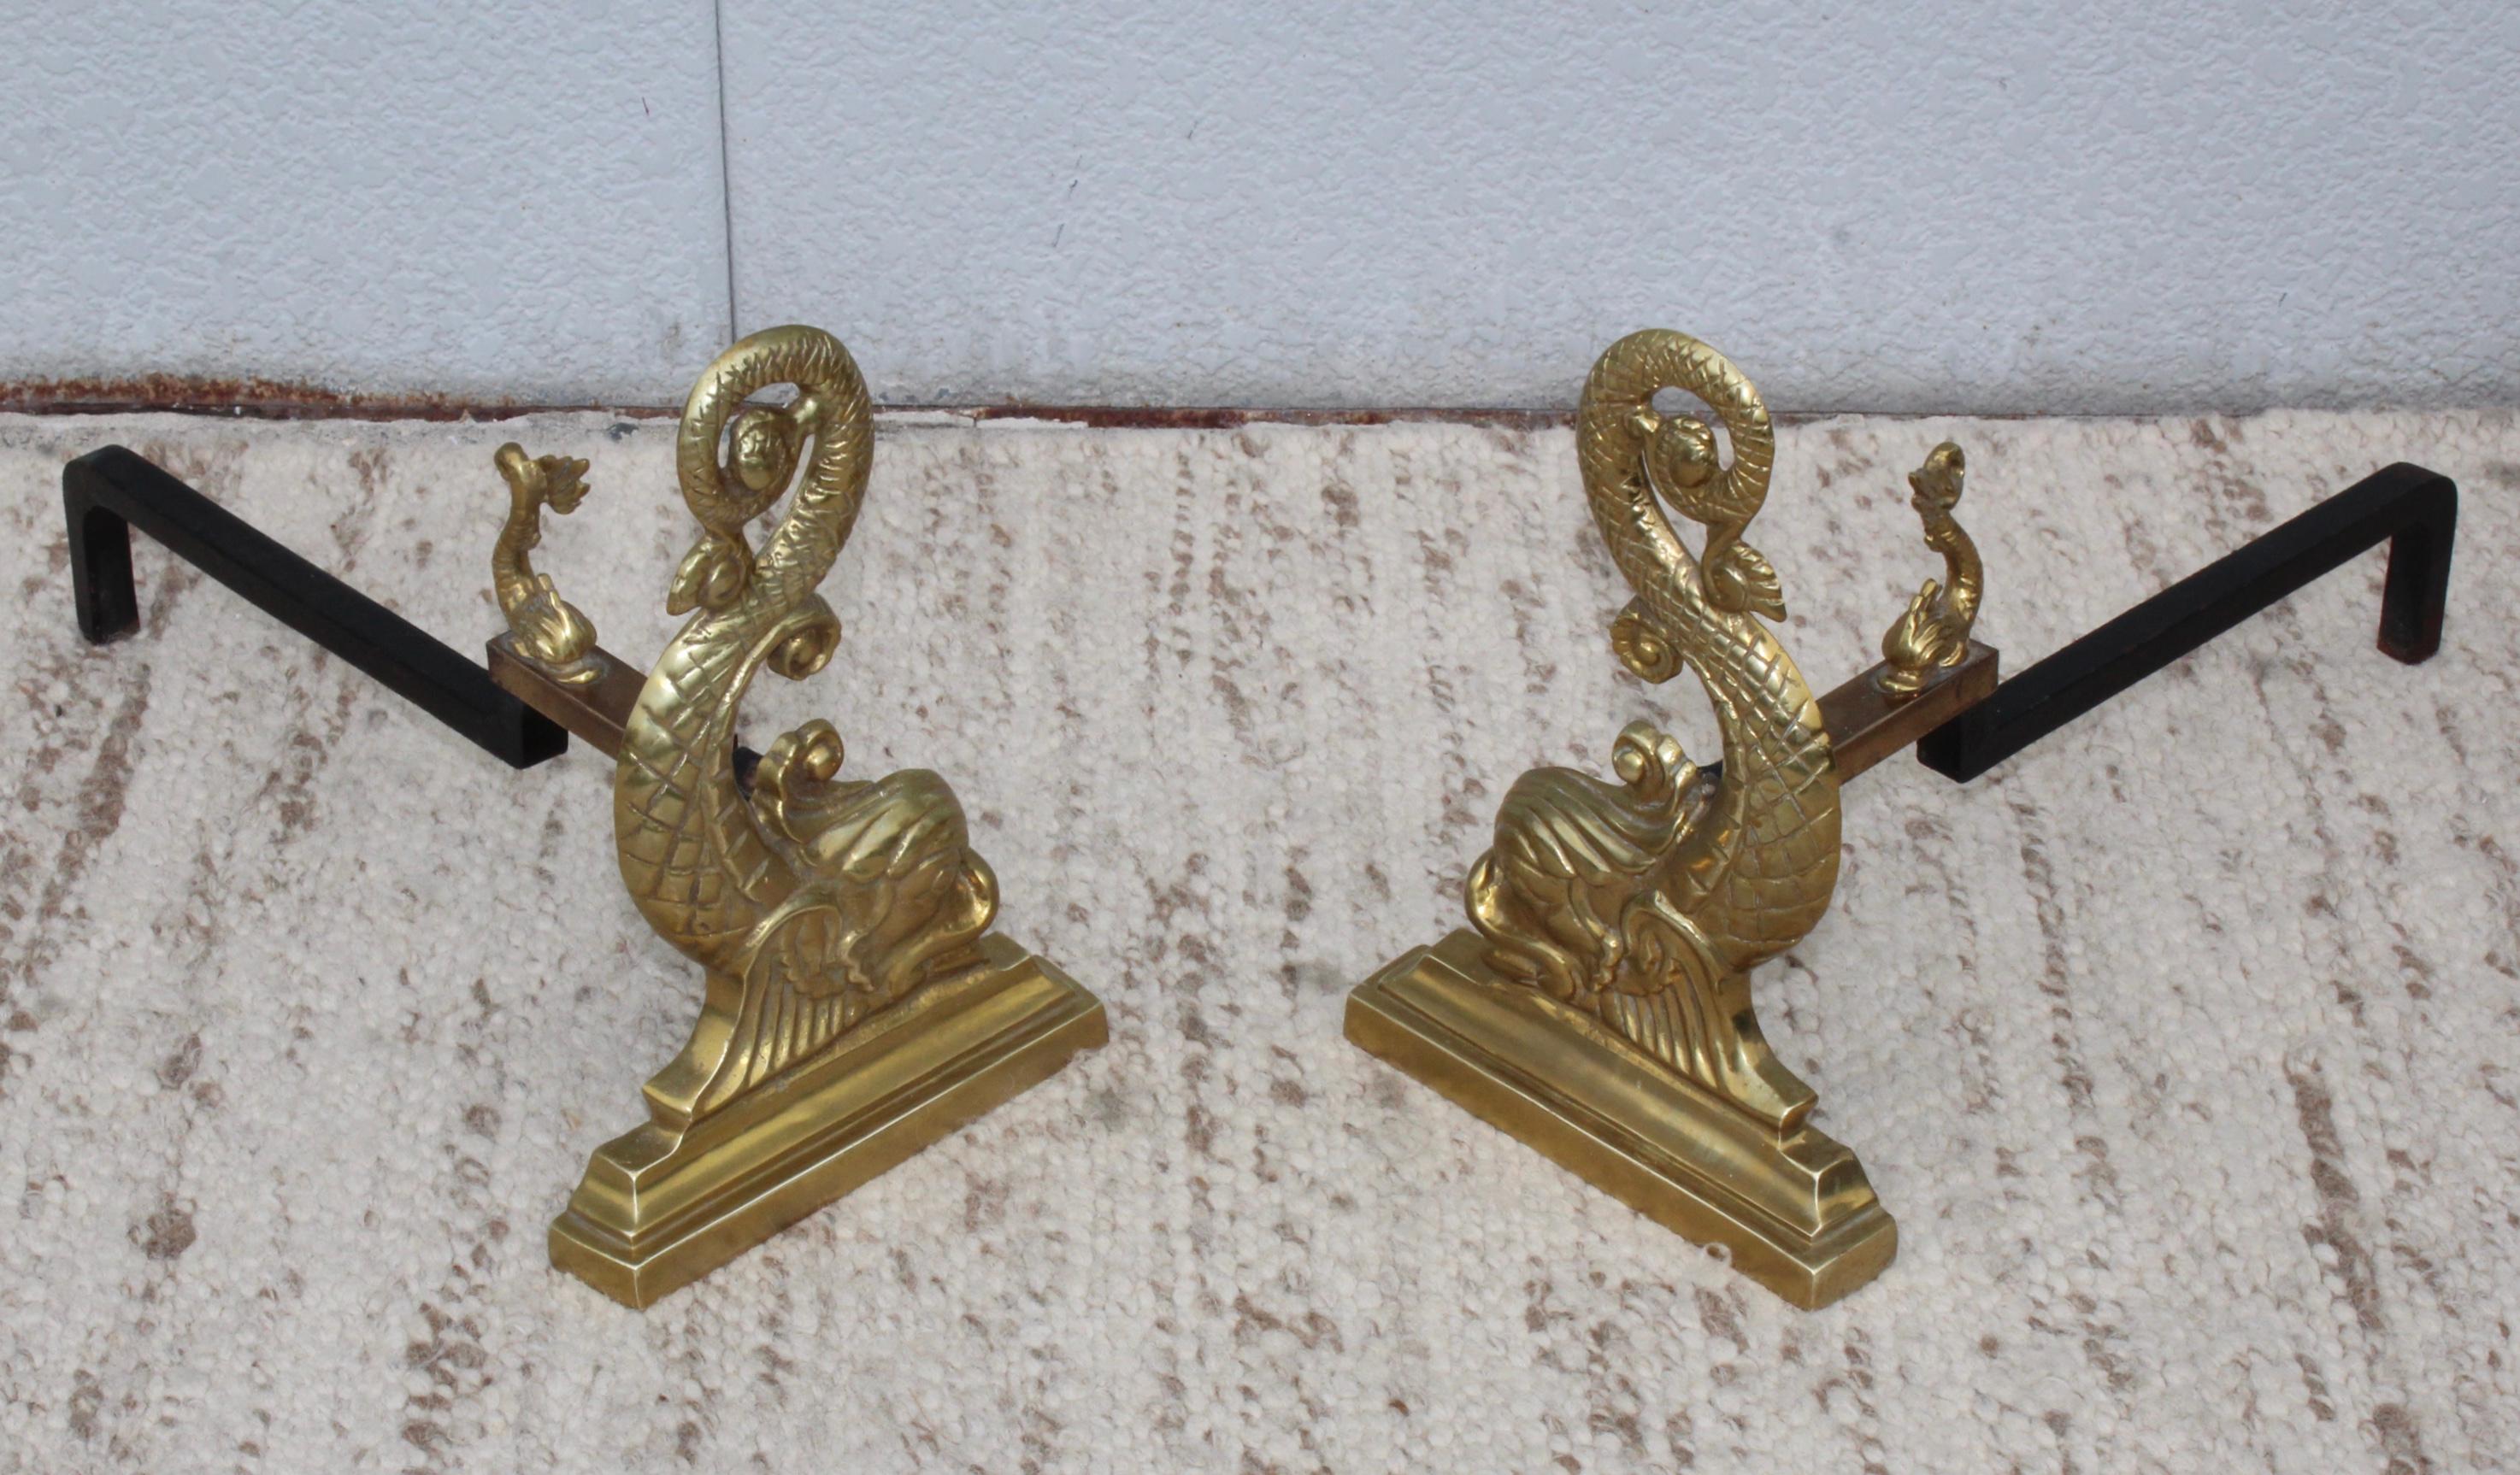 Stunning pair of solid brass and irons Dolphins andirons by Virginia Metalcrafters.